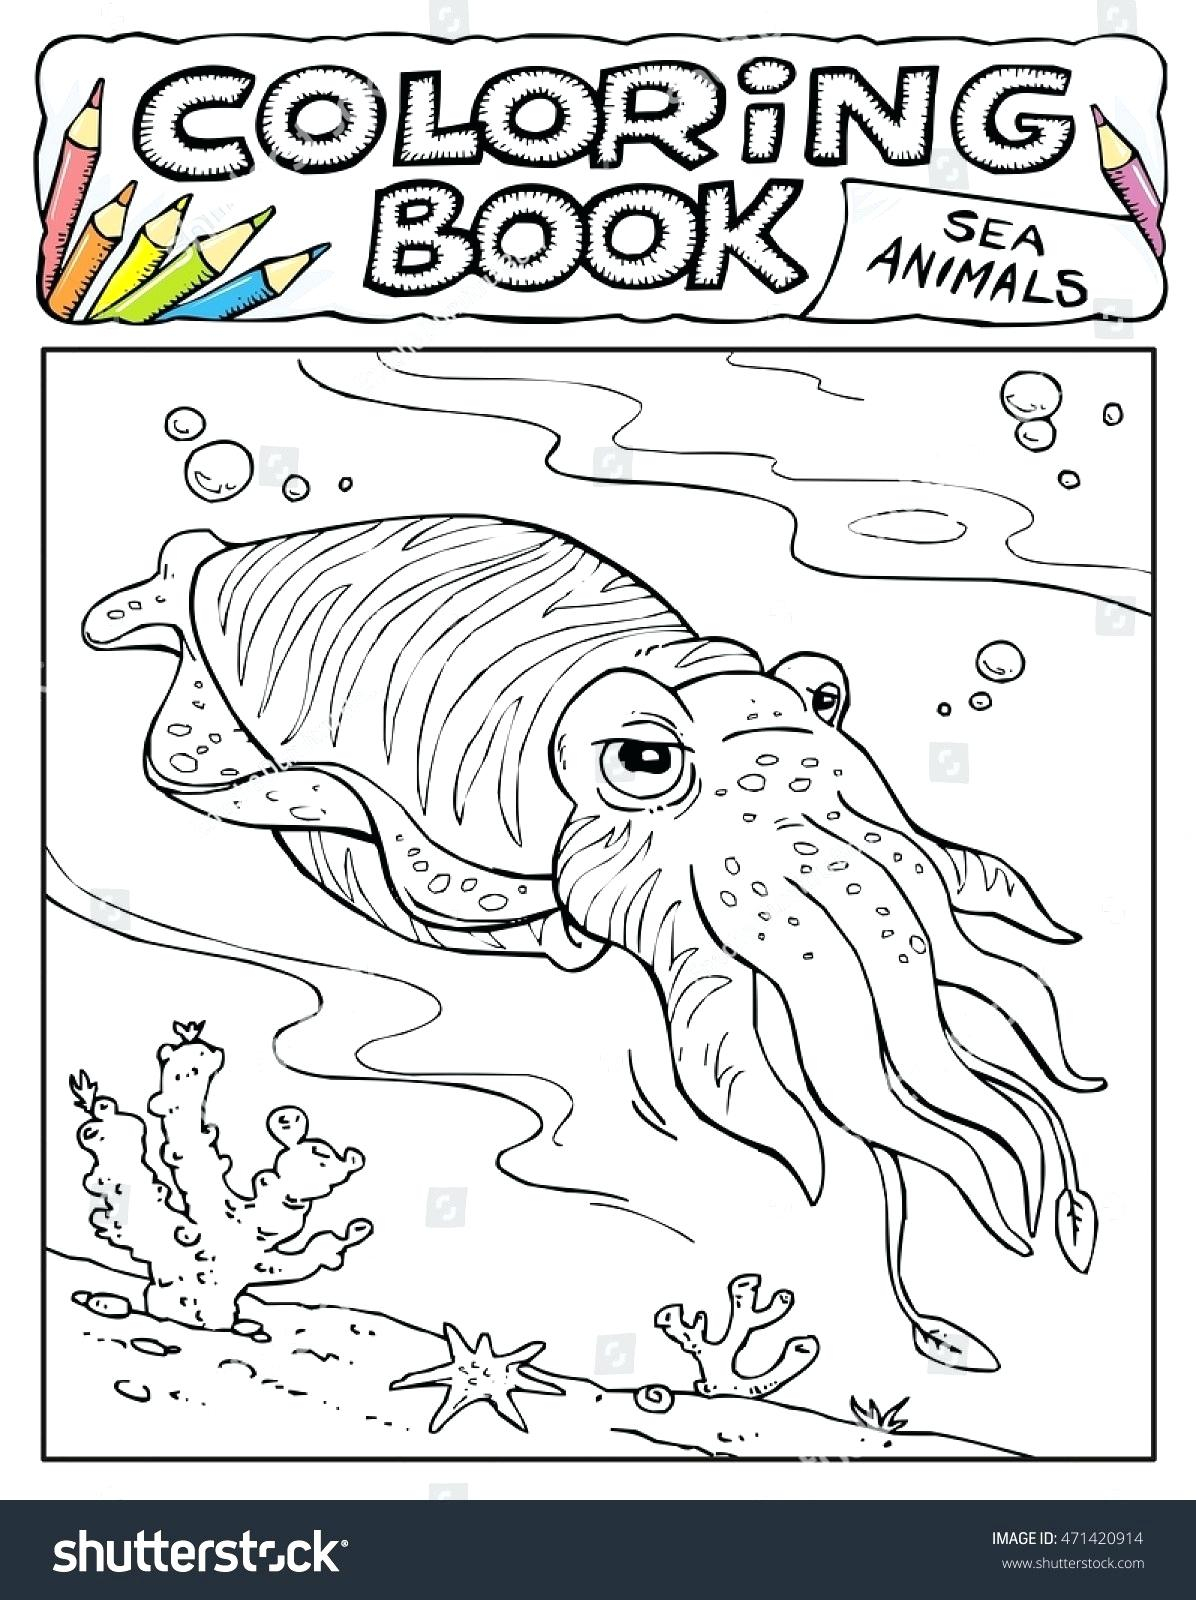 Squid Coloring Pages Printable Giant Squid Coloring Sheet Fiestaprintco